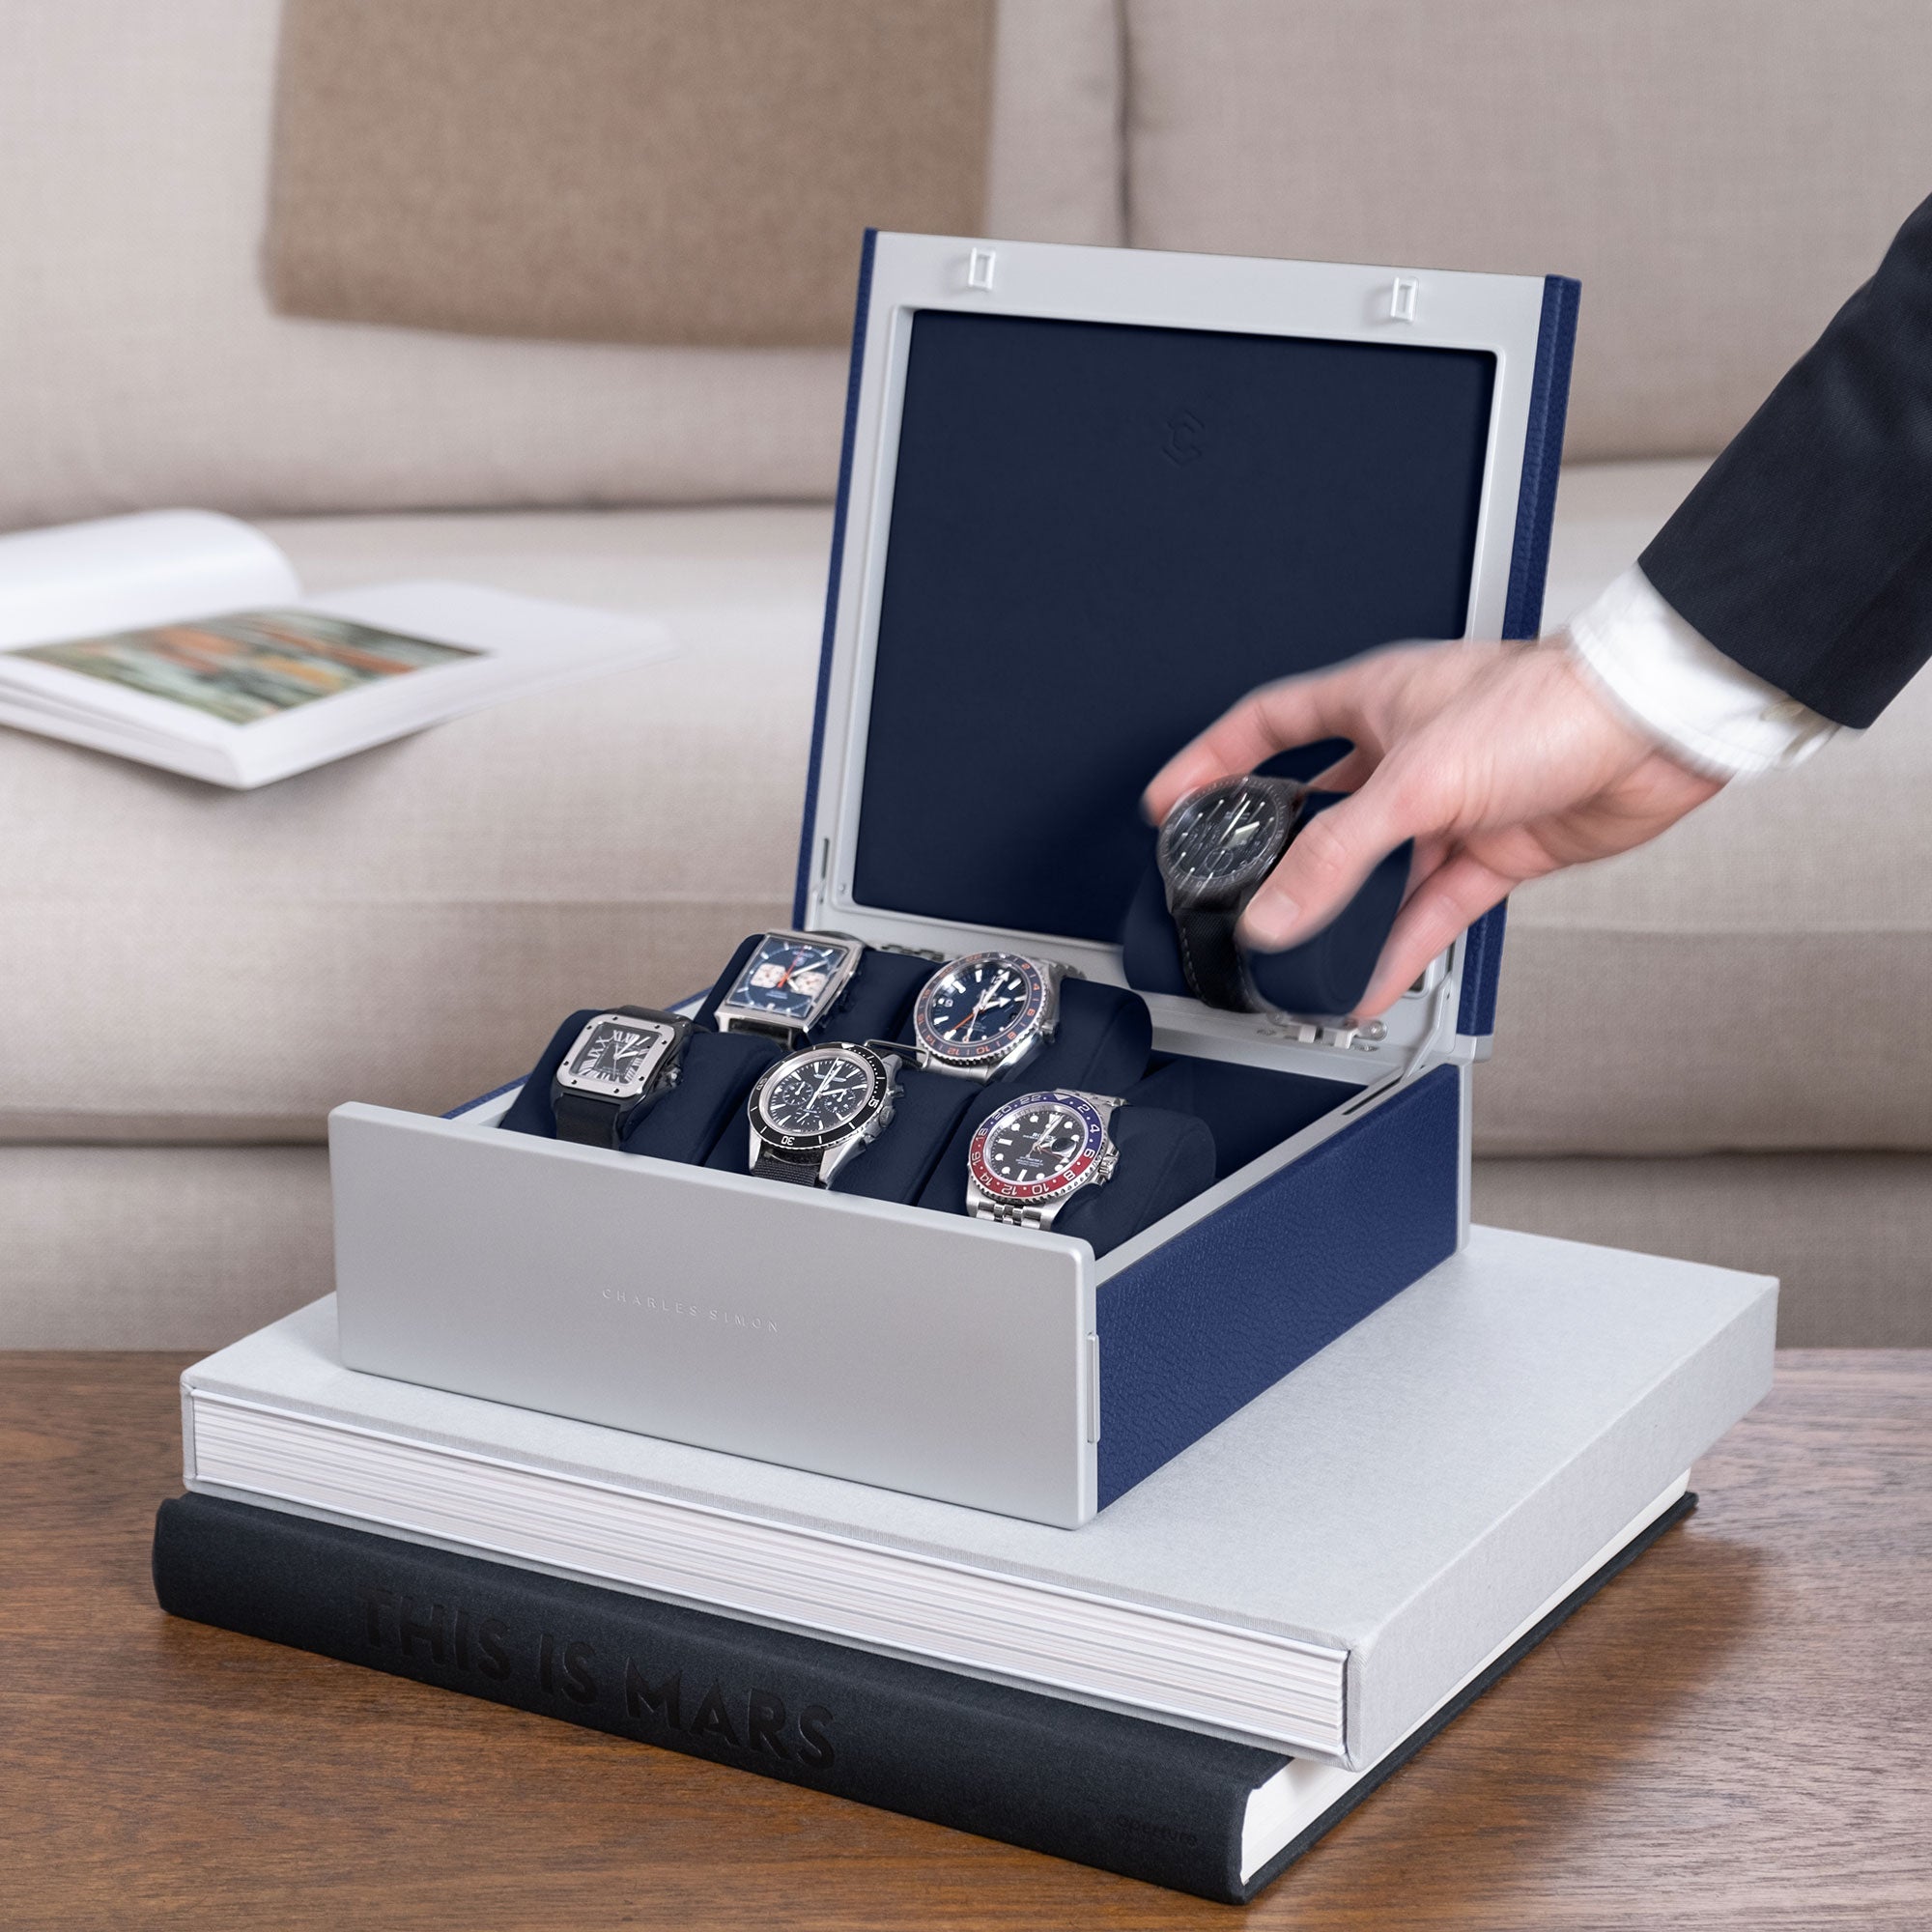 Lifestyle shot of sapphire Spence watch box holding 6 luxury men's watches includng Rolex, Omega, Cartier, Jaeger Lecoultre. Business man is taking watch placed on deep blue Alcantara cushion from watch box 